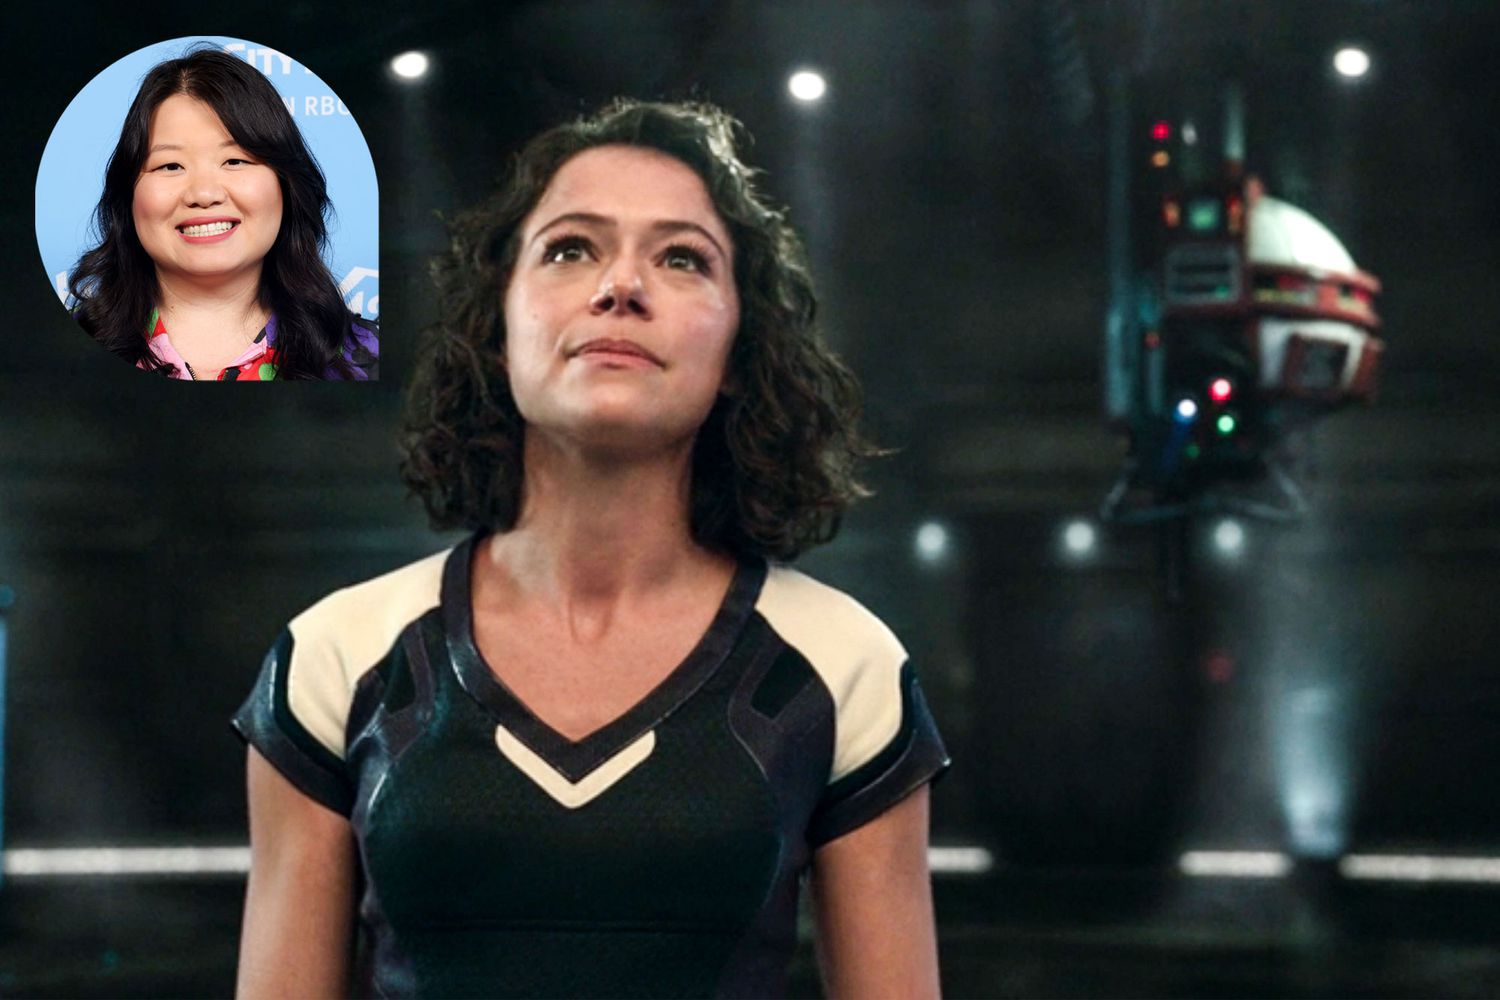 She-Hulk Attorney at Law Jen Walters talking to the K.E.V.I.N. Feige robot